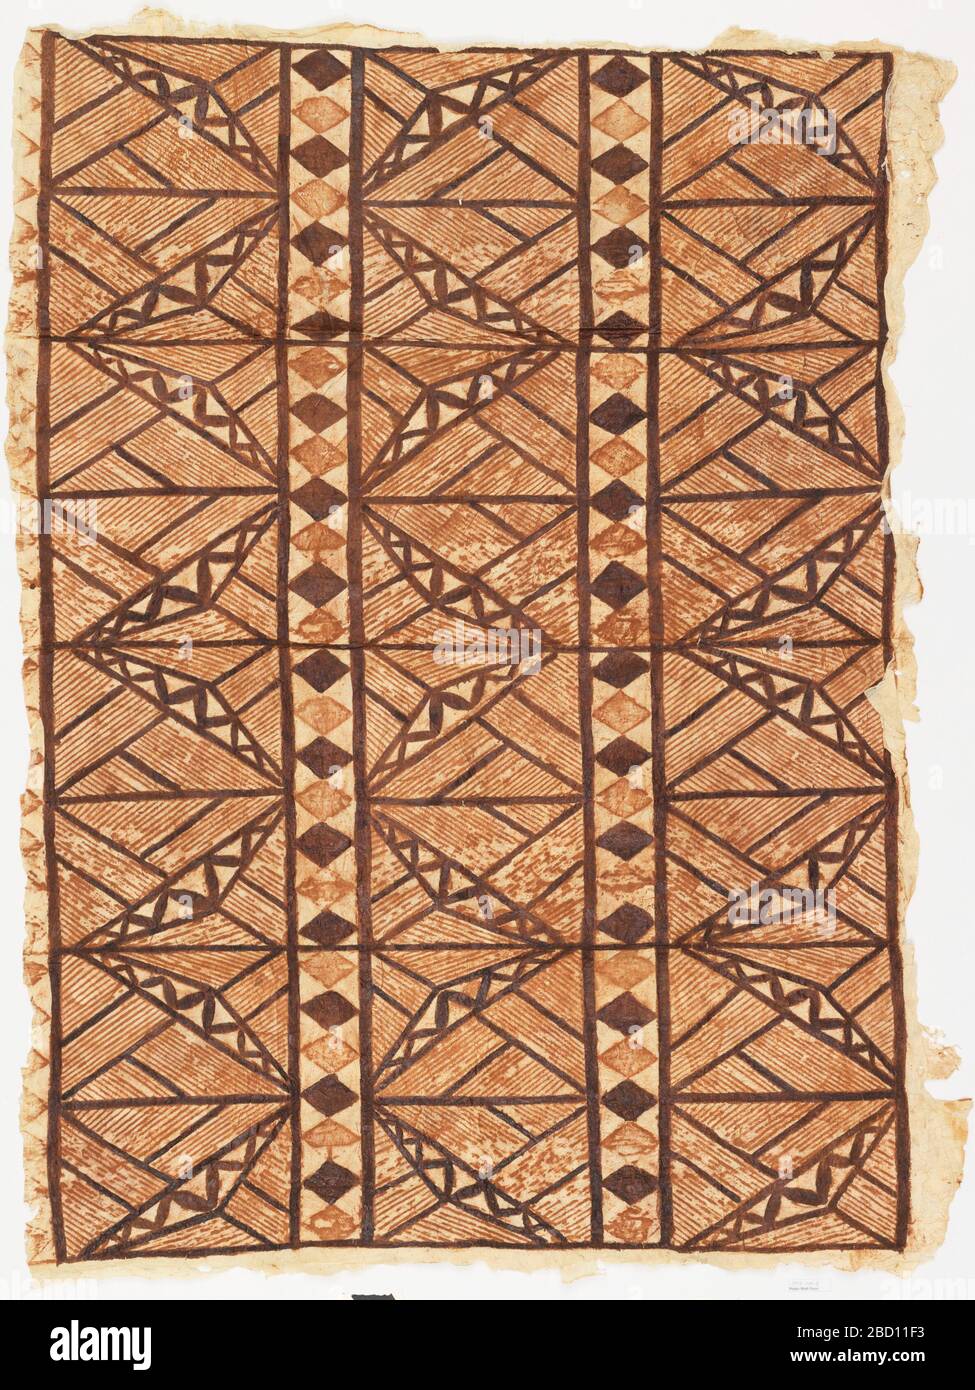 Bark cloth. Research in ProgressLarge panel of tapa cloth. Thick white fabric made from beaten bark, painted in rust and brown in design of three rows of rectangles enclosing striated angular forms. Rows are divided by stripes of diamond pattern. Bark cloth Stock Photo